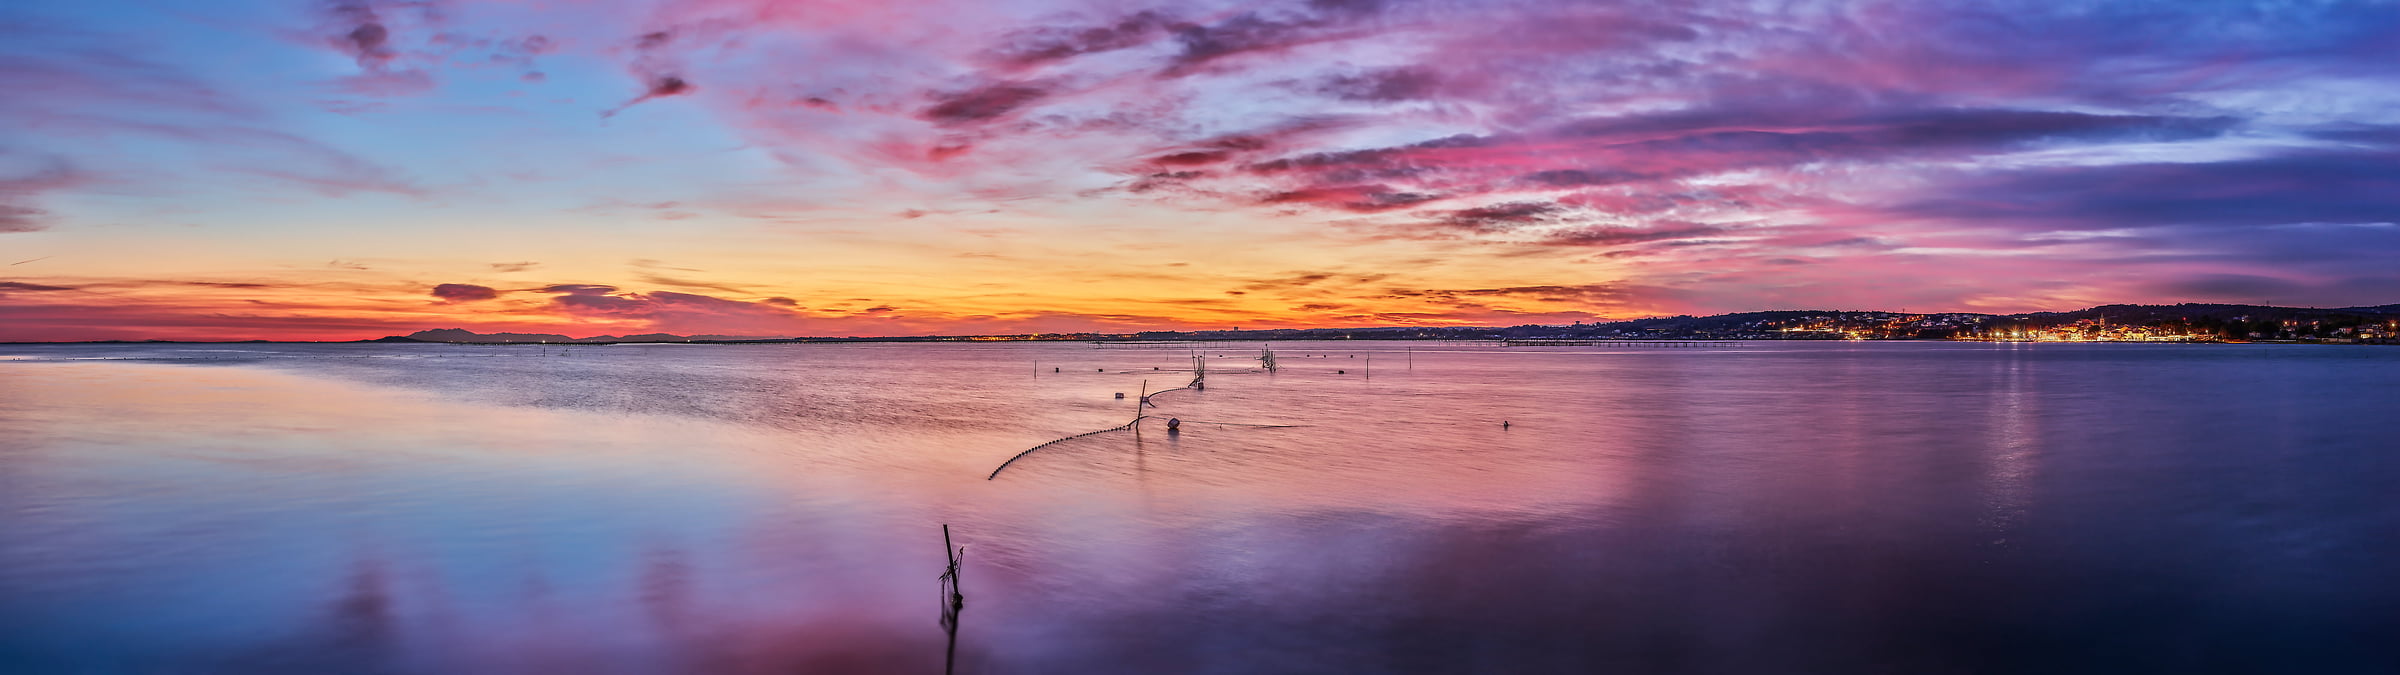 288 megapixels! A very high resolution, large-format VAST photo print of a sunset over water; seascape photograph created by David Meaux in Étang de Thau, Balaruc-les-Bains, l'Hérault, France